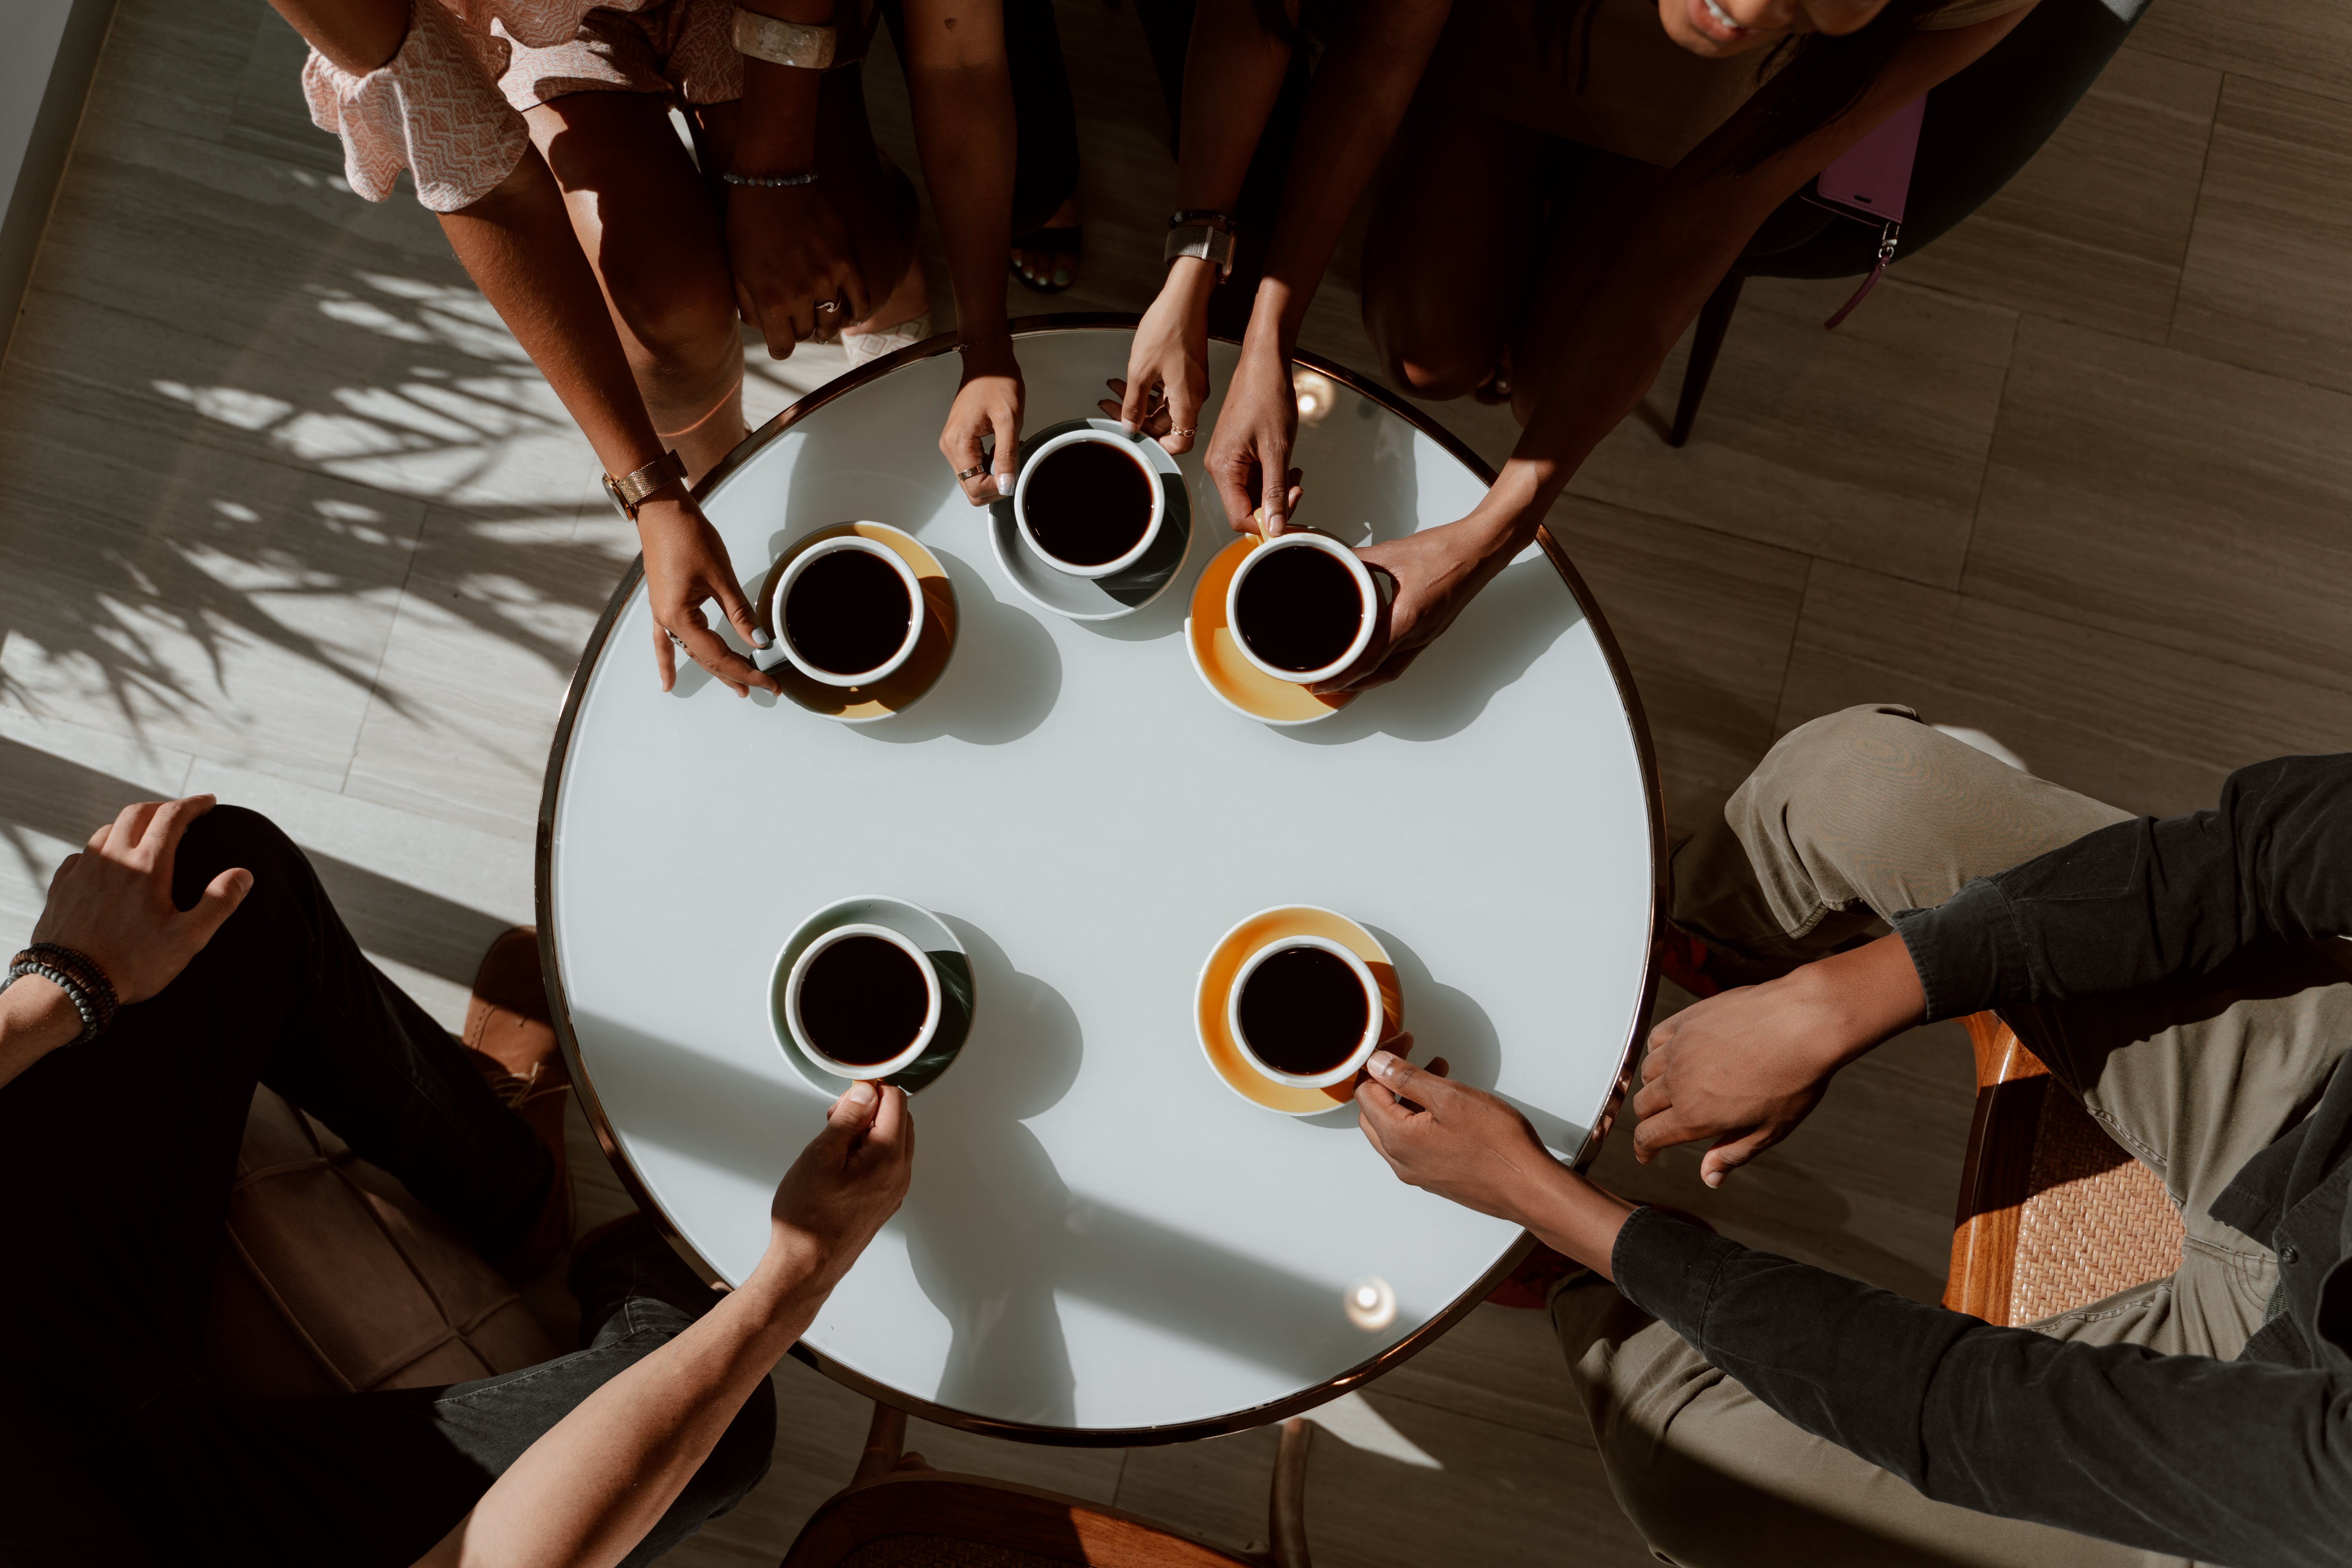 Photo by RDNE Stock project: https://www.pexels.com/photo/coffee-drink-on-ceramic-cups-on-table-top-4920855/